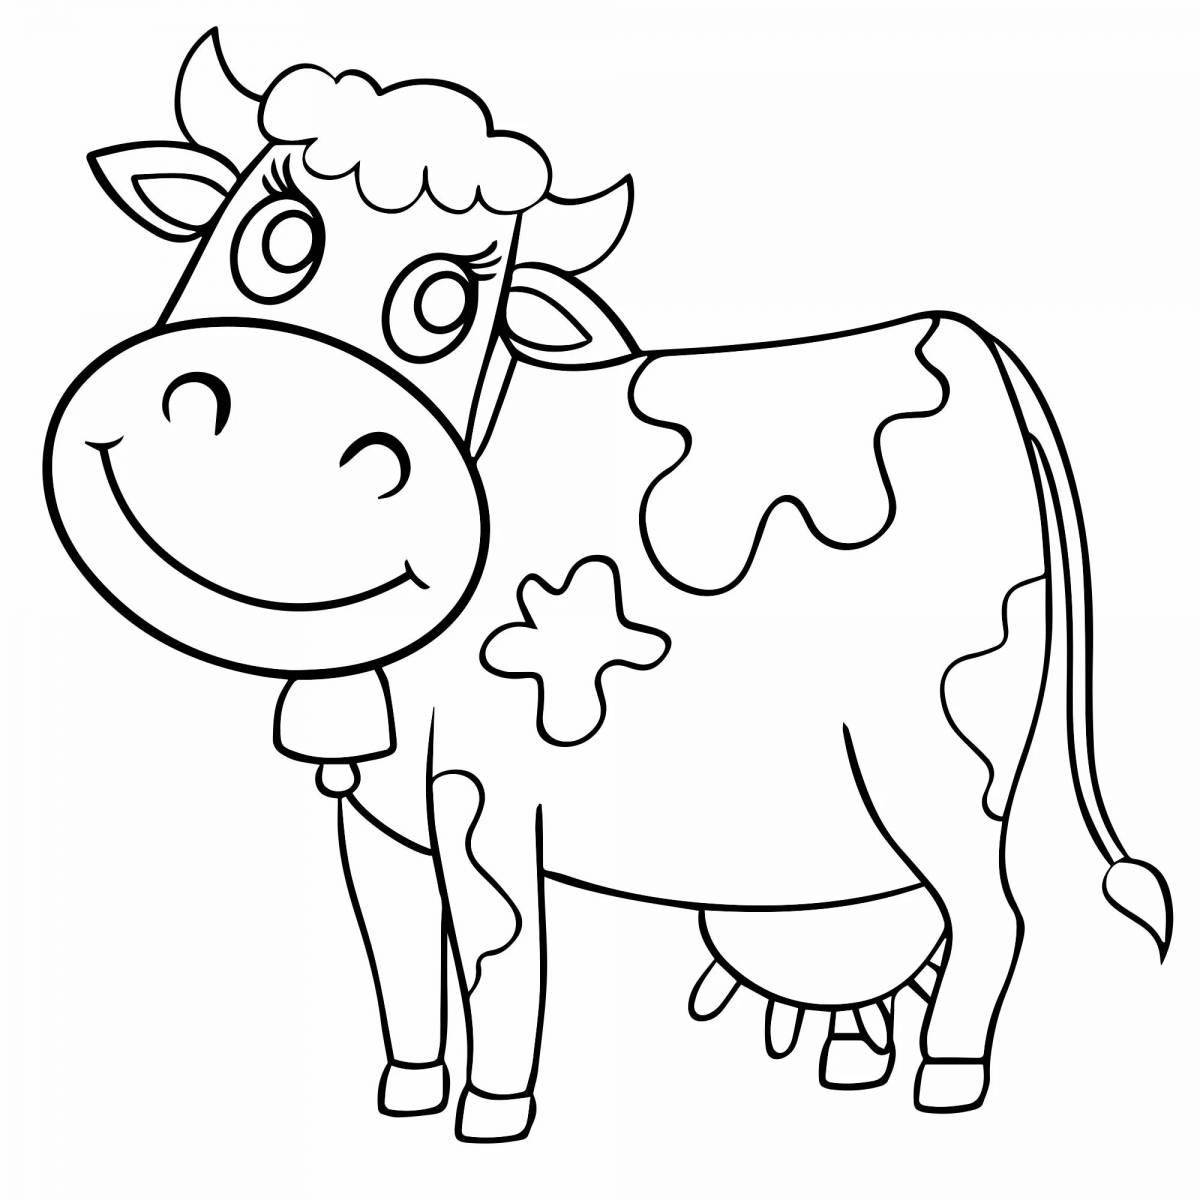 Sparkling cow coloring book for kids